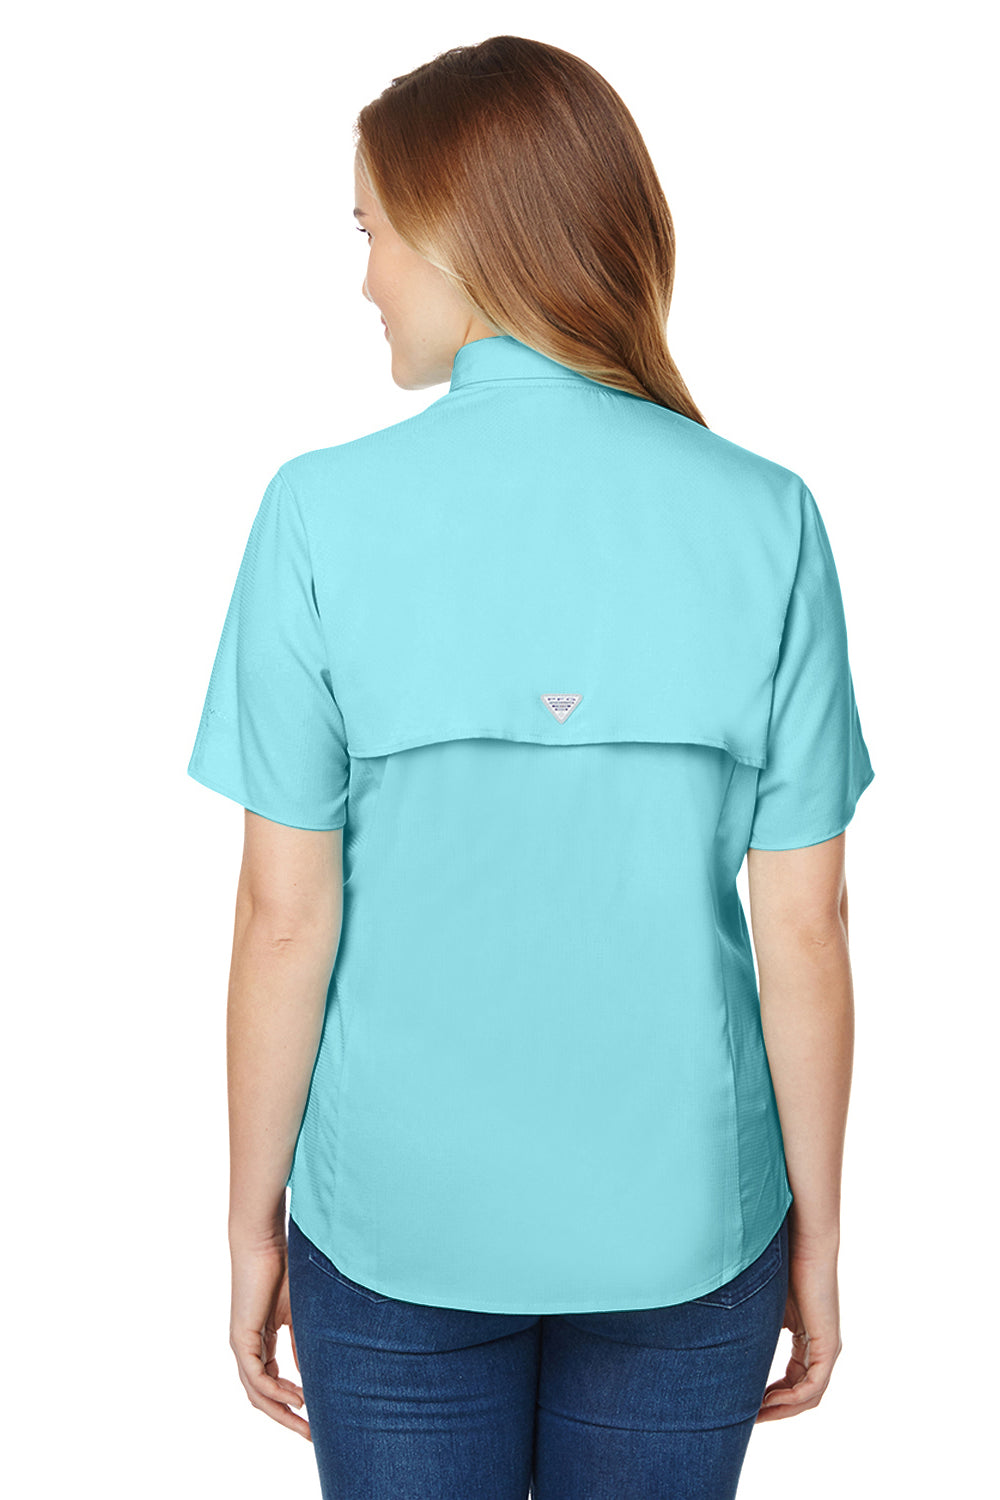 Columbia 7277 Womens Tamiami II Moisture Wicking Short Sleeve Button Down Shirt w/ Double Pockets Clear Blue Back